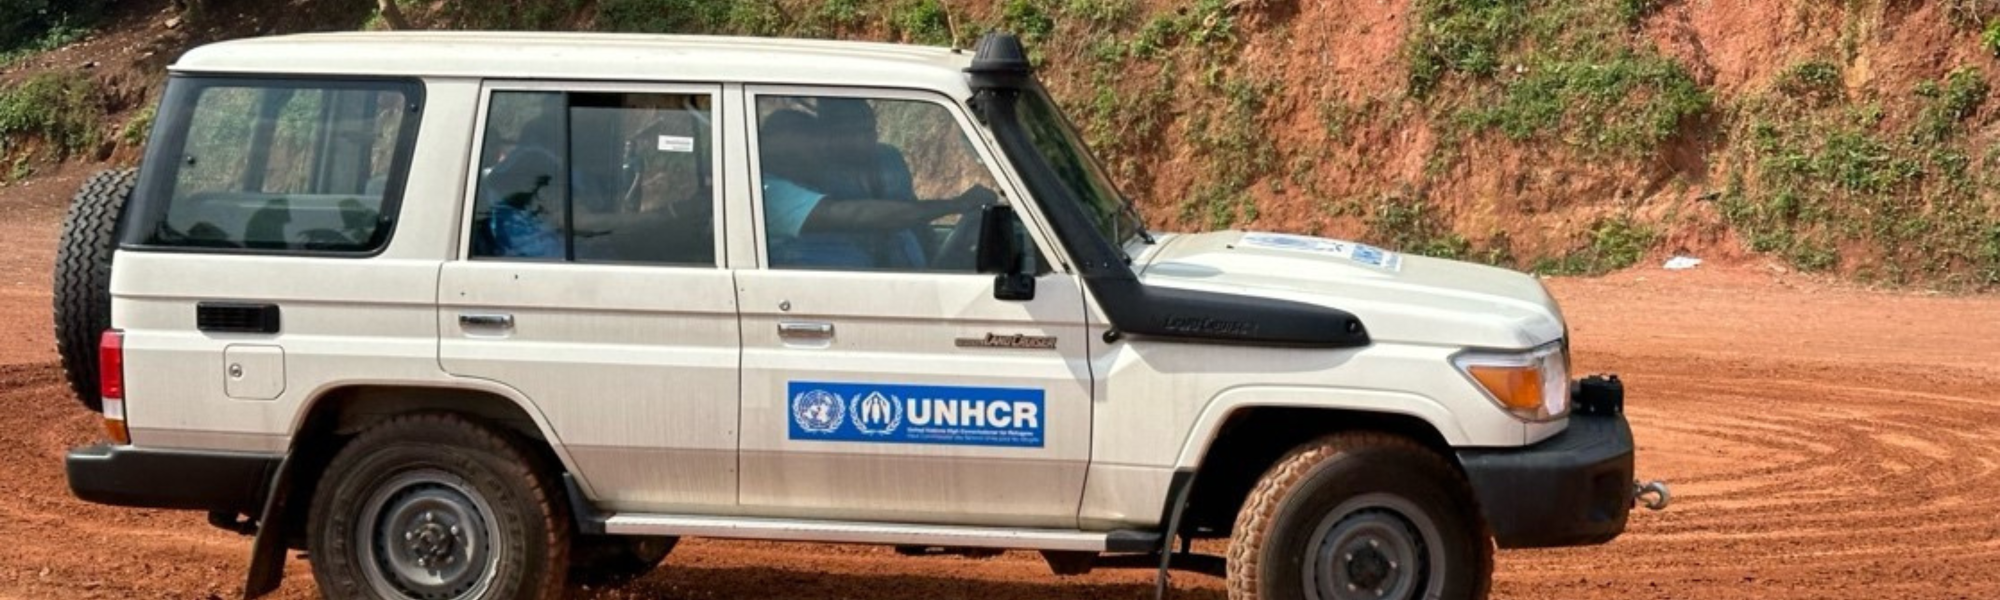 To reduce road accidents in Cameroon, Rwanda, Uganda, and the Democratic Republic of the Congo, IRU is providing a comprehensive defensive driver training framework to the United Nations High Commissioner for Refugees (UNHCR).